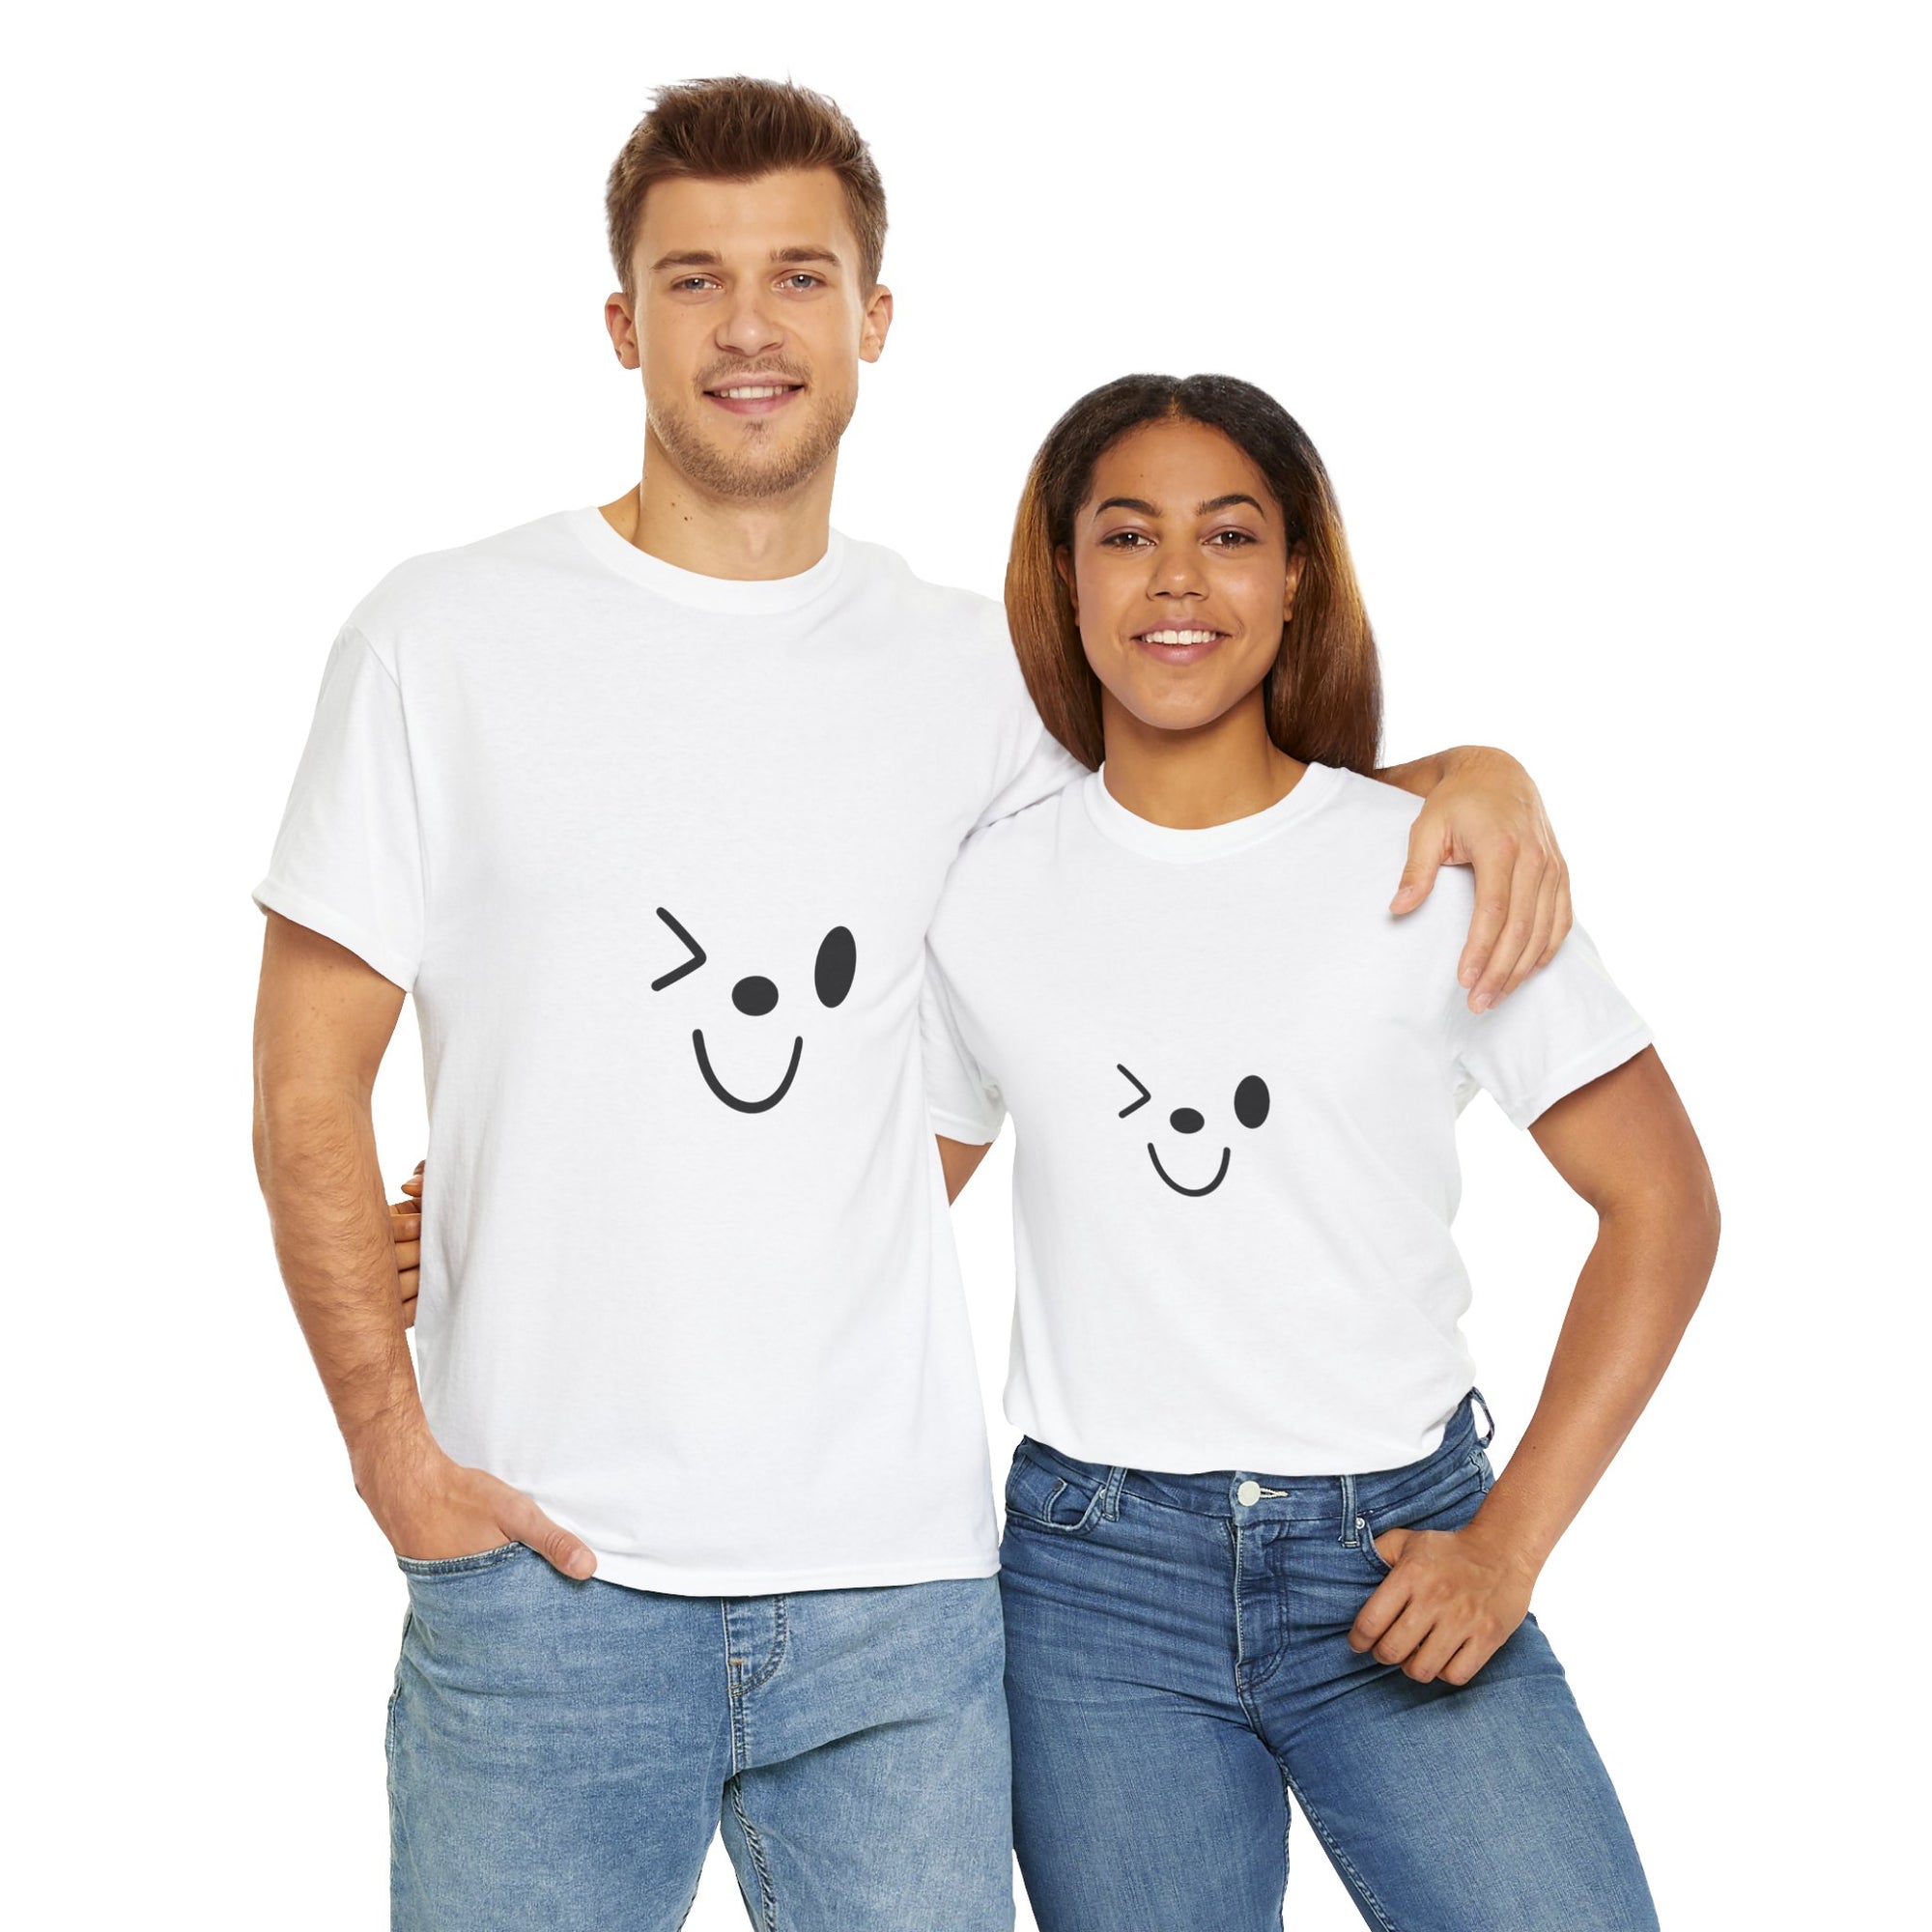 Winking Tongue-Out Smiley Face T-Shirt